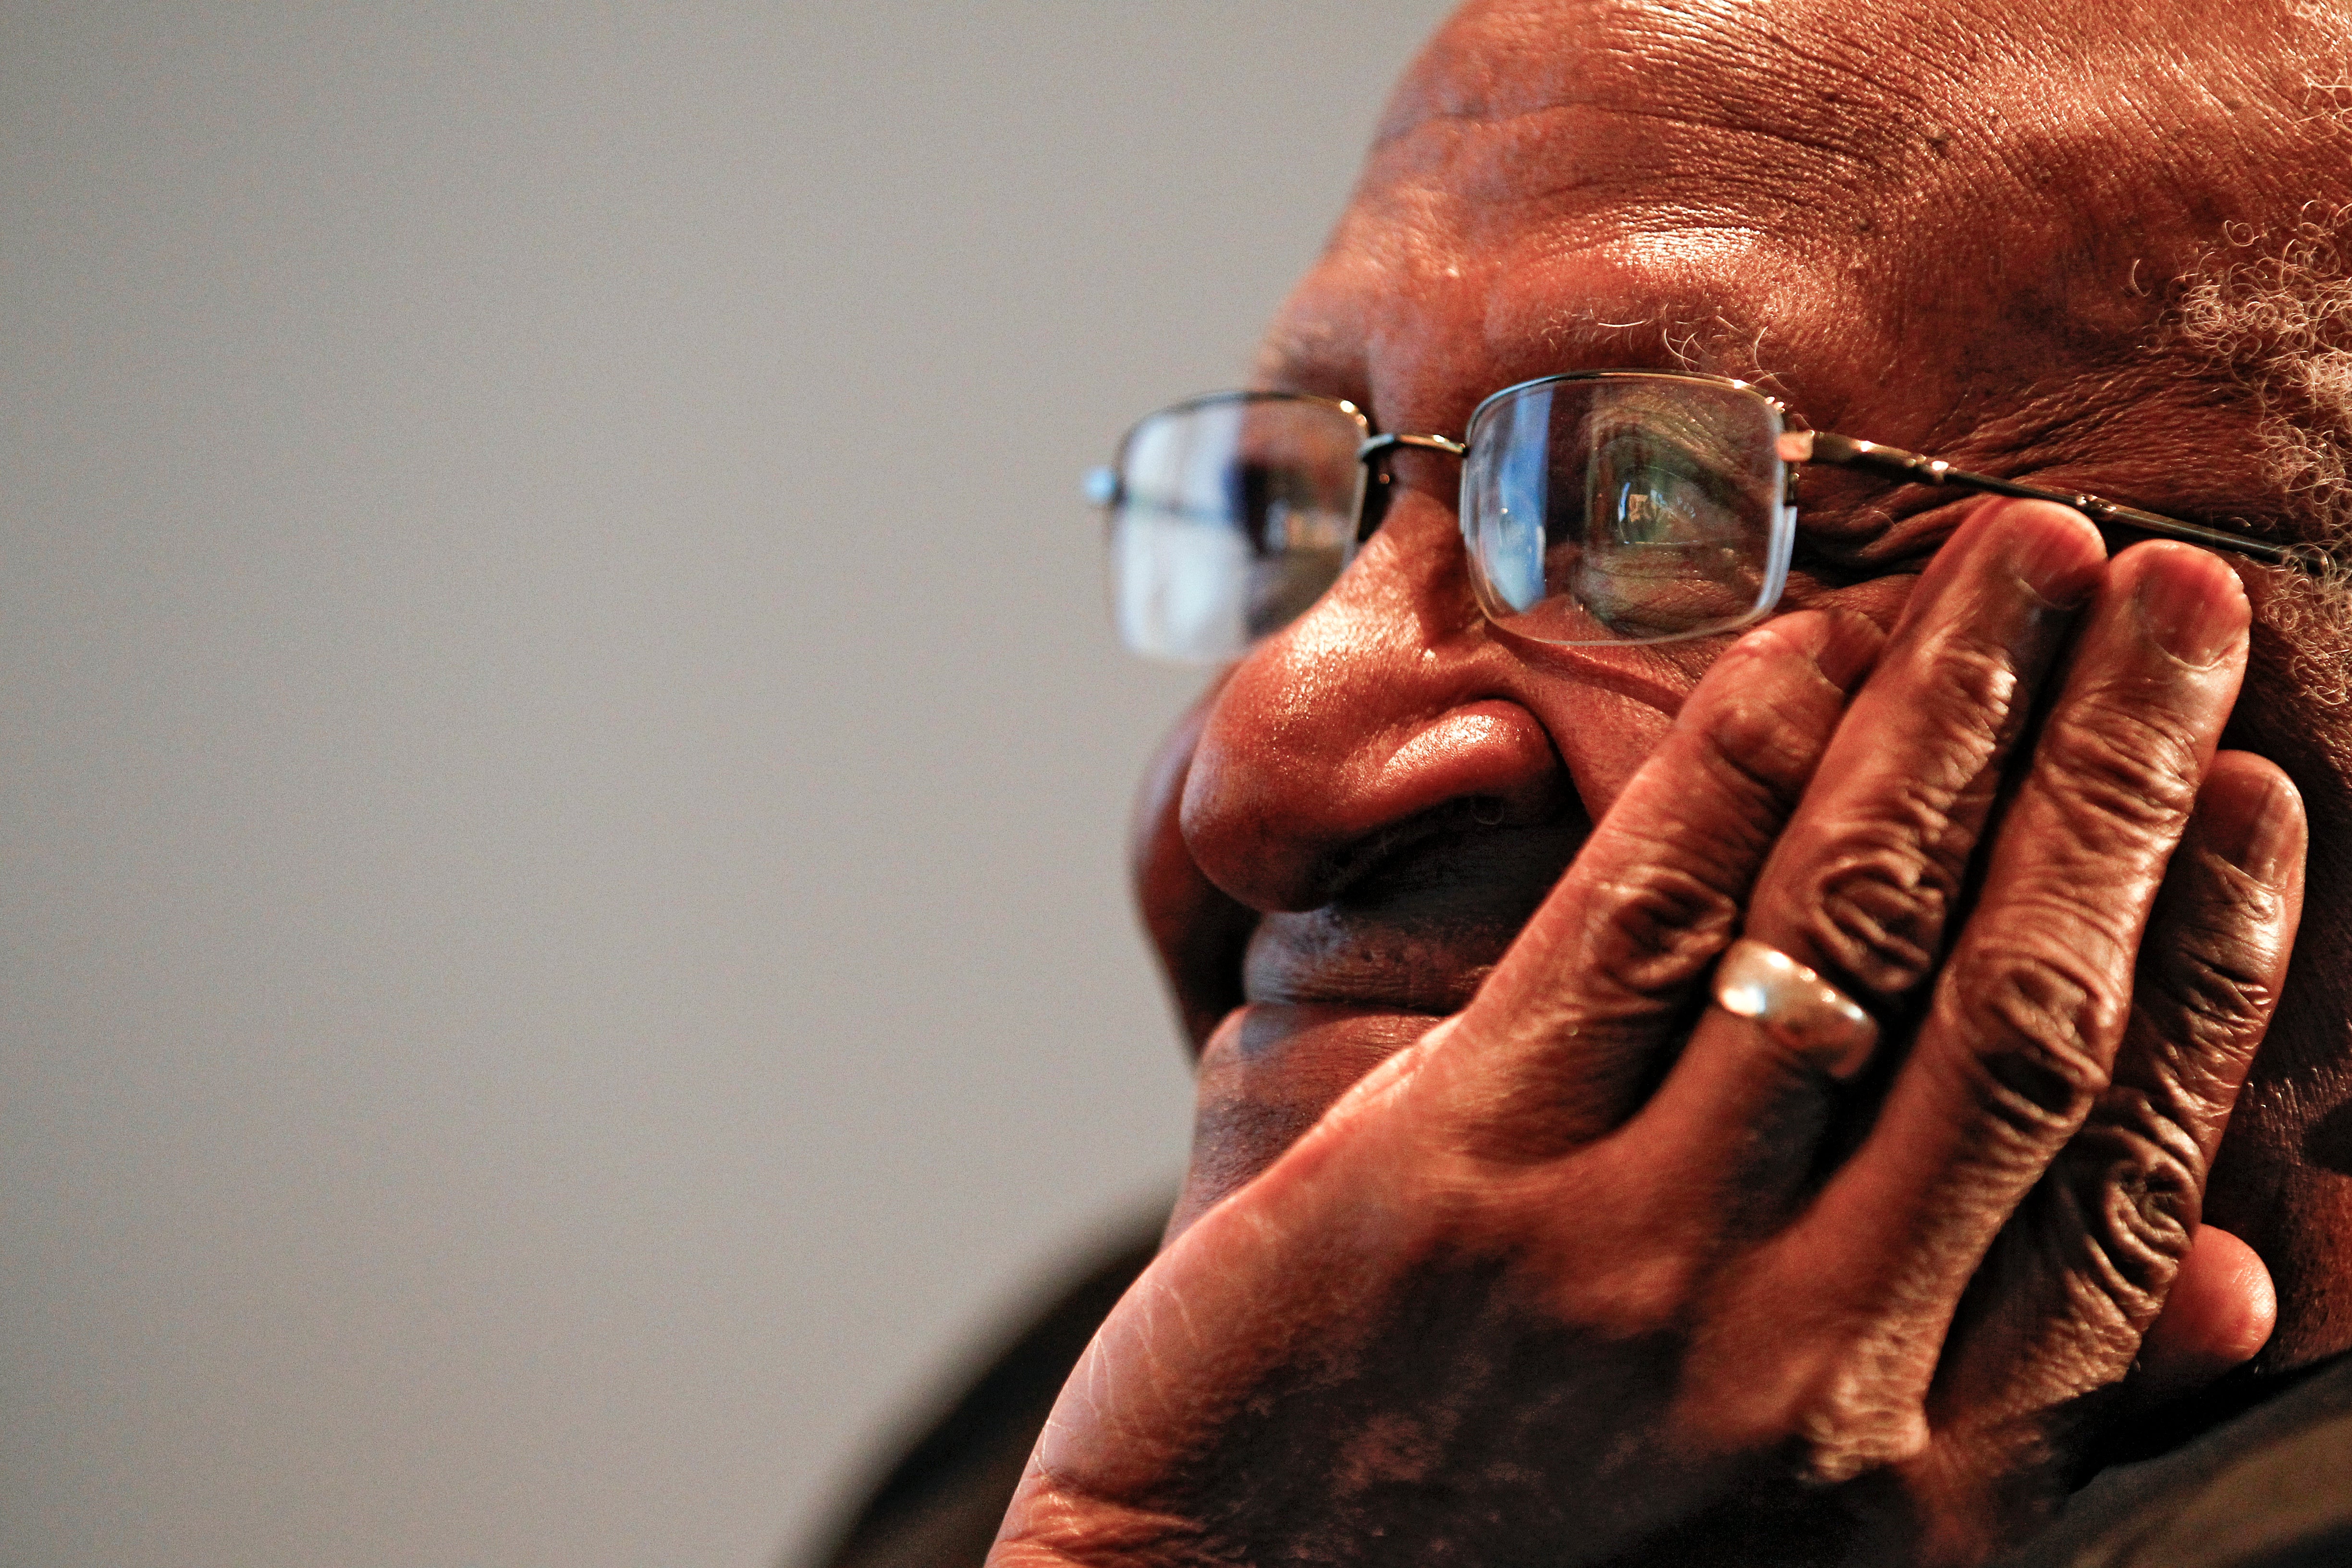 File photo: Archbishop Desmond Tutu listens to speeches at at event in Cape Town, South Africa, 30 July 2010